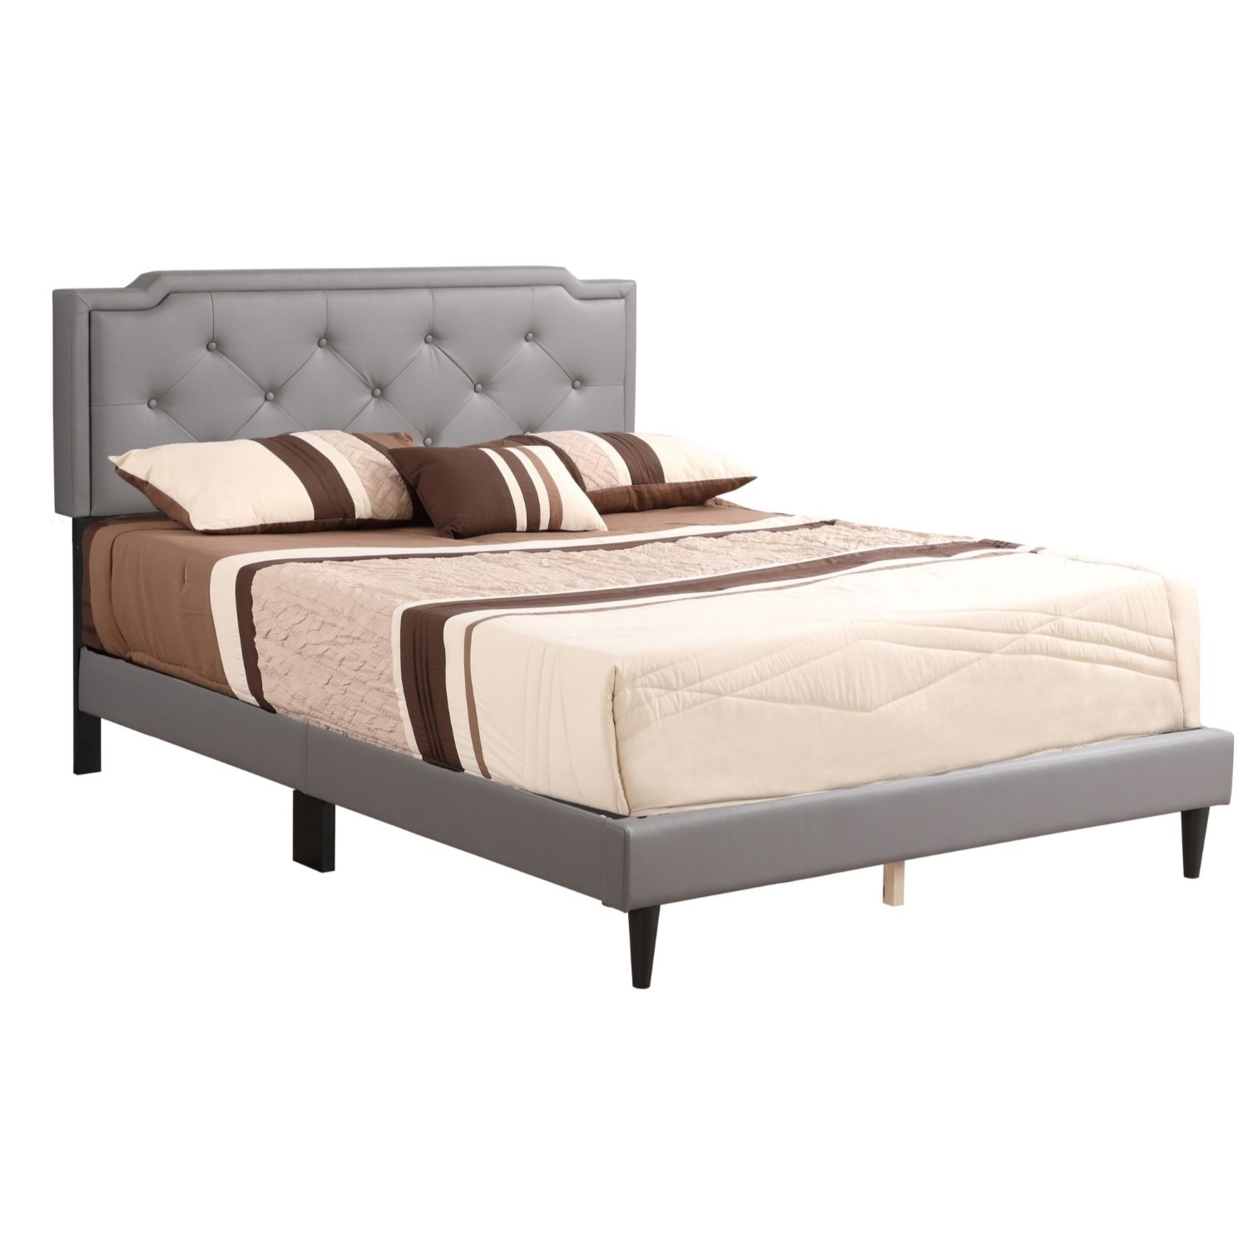 Home Furnitue Deb Light Grey Full Adjustable Panel Bed - image 1 of 5